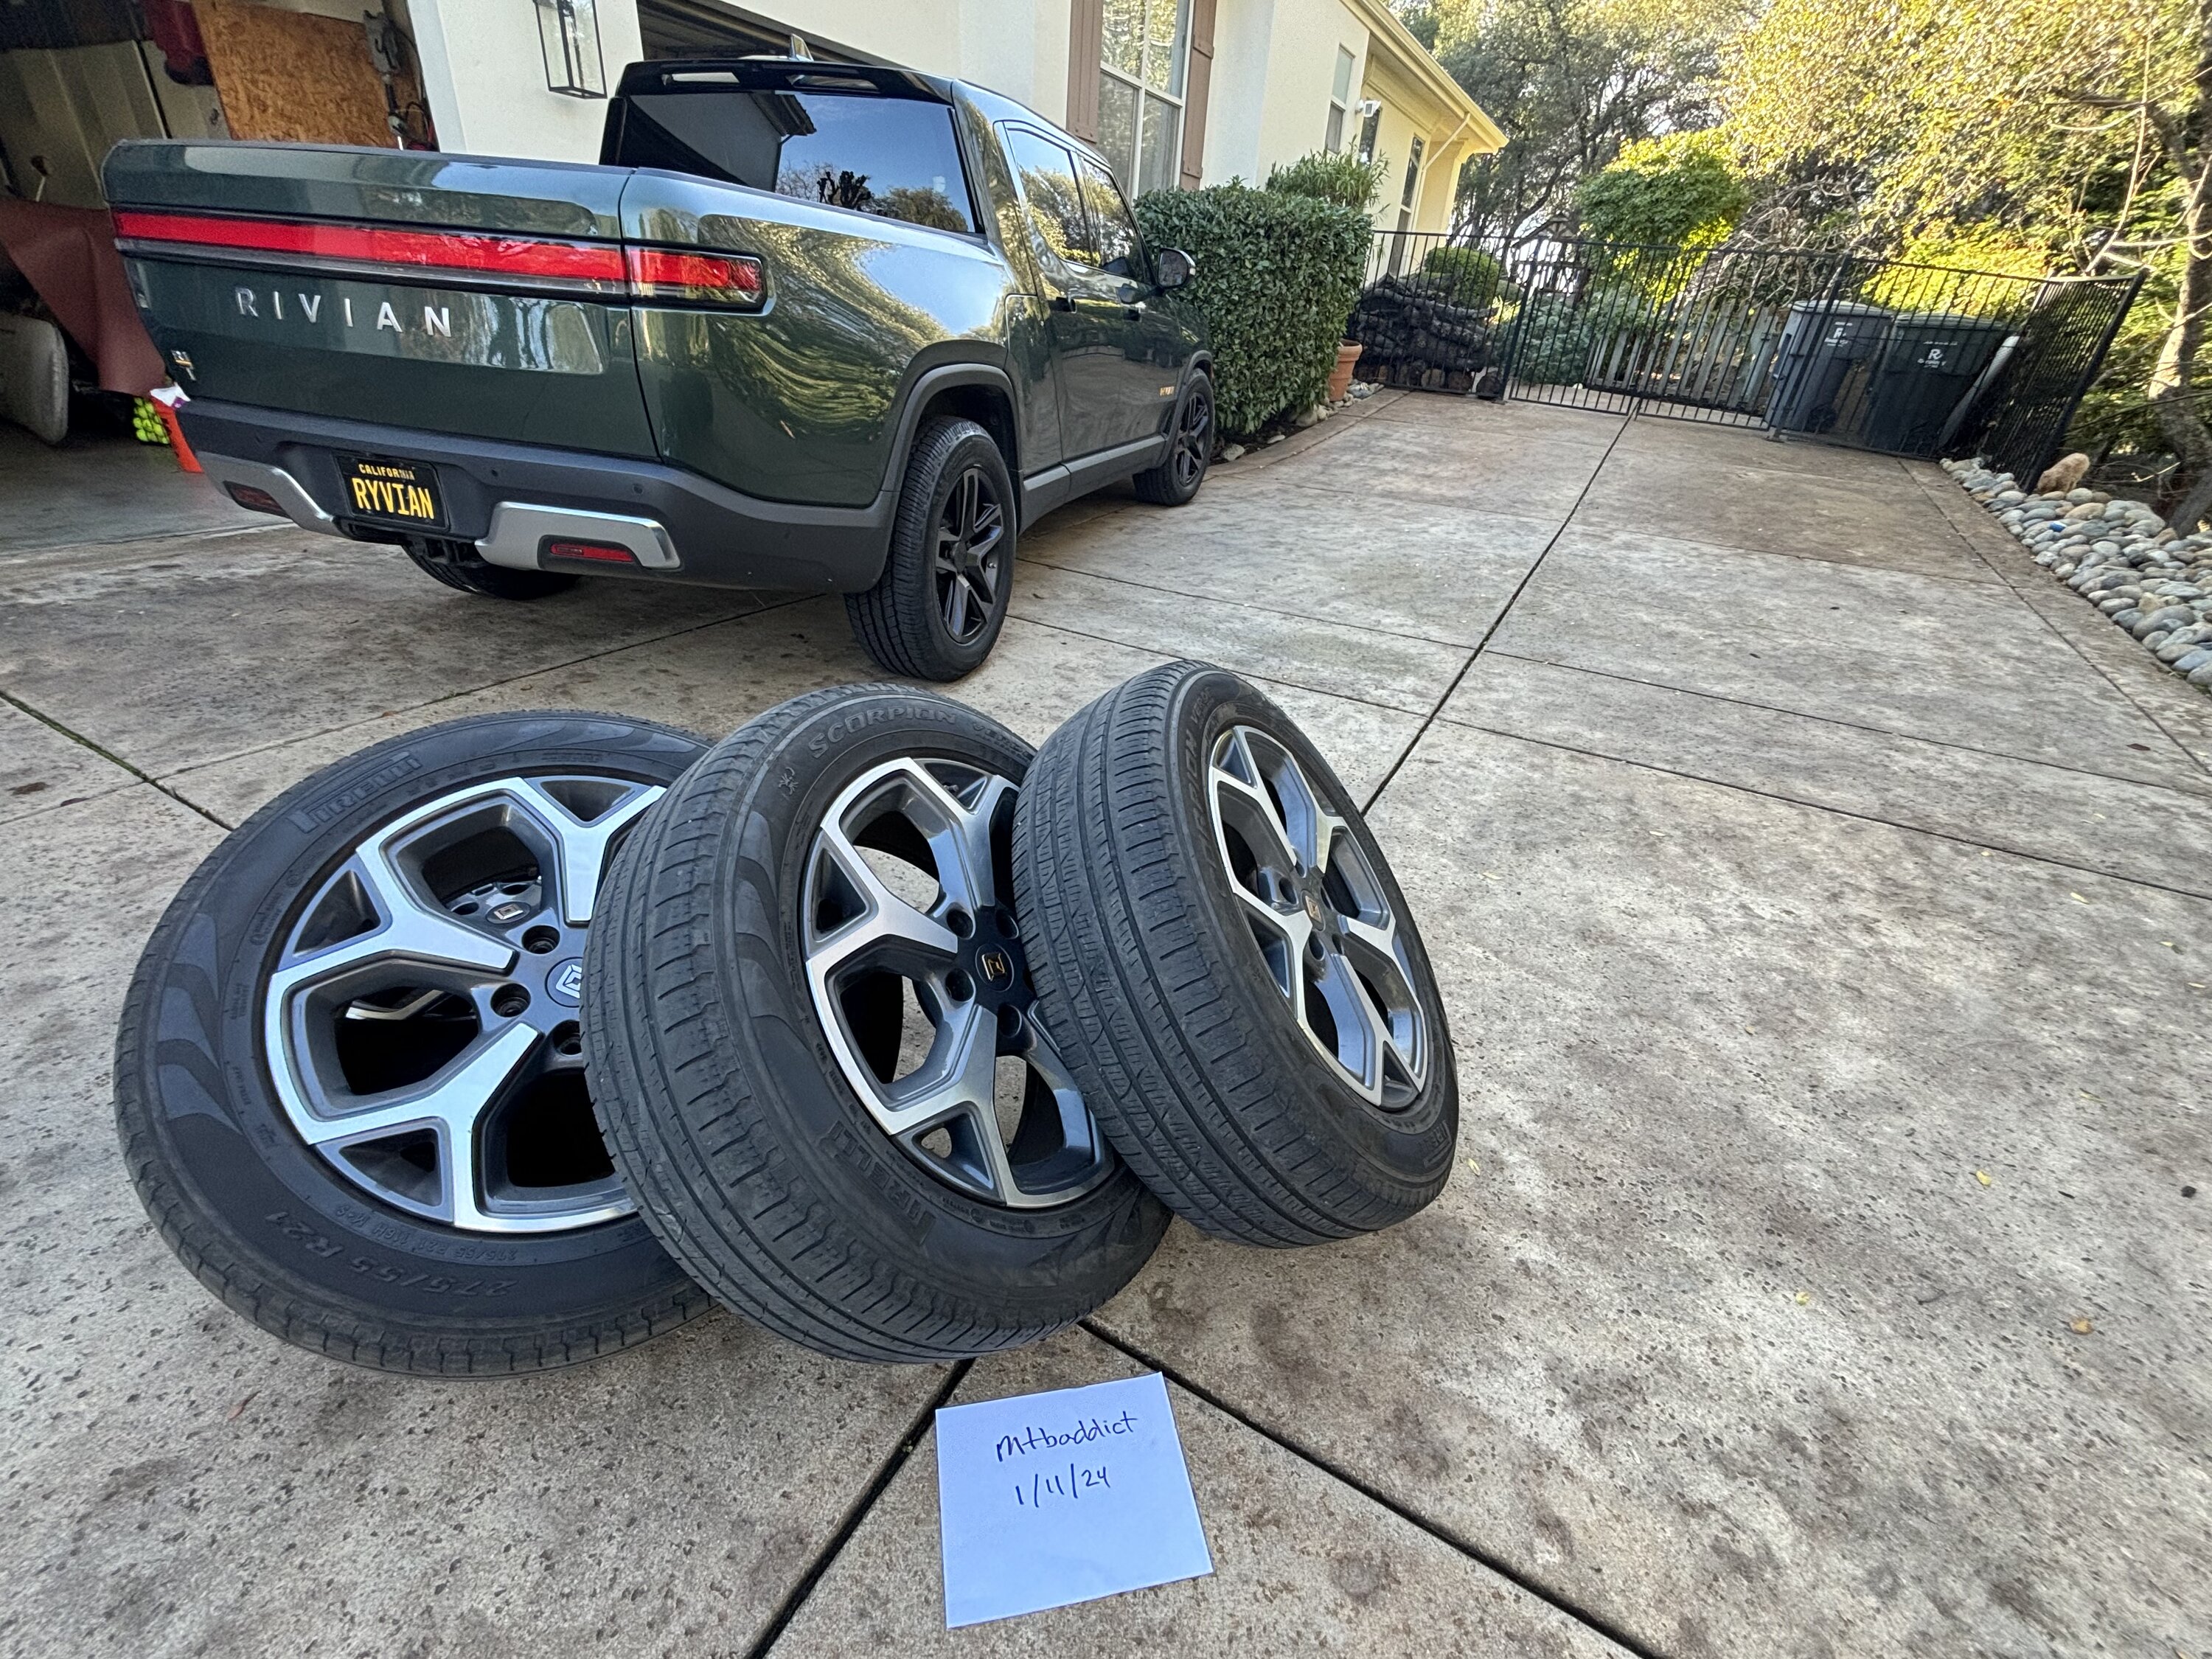 Rivian R1T R1S 3 individual 21” wheels and tires for spares $250 each - Sacramento and Foothills Area IMG_5703